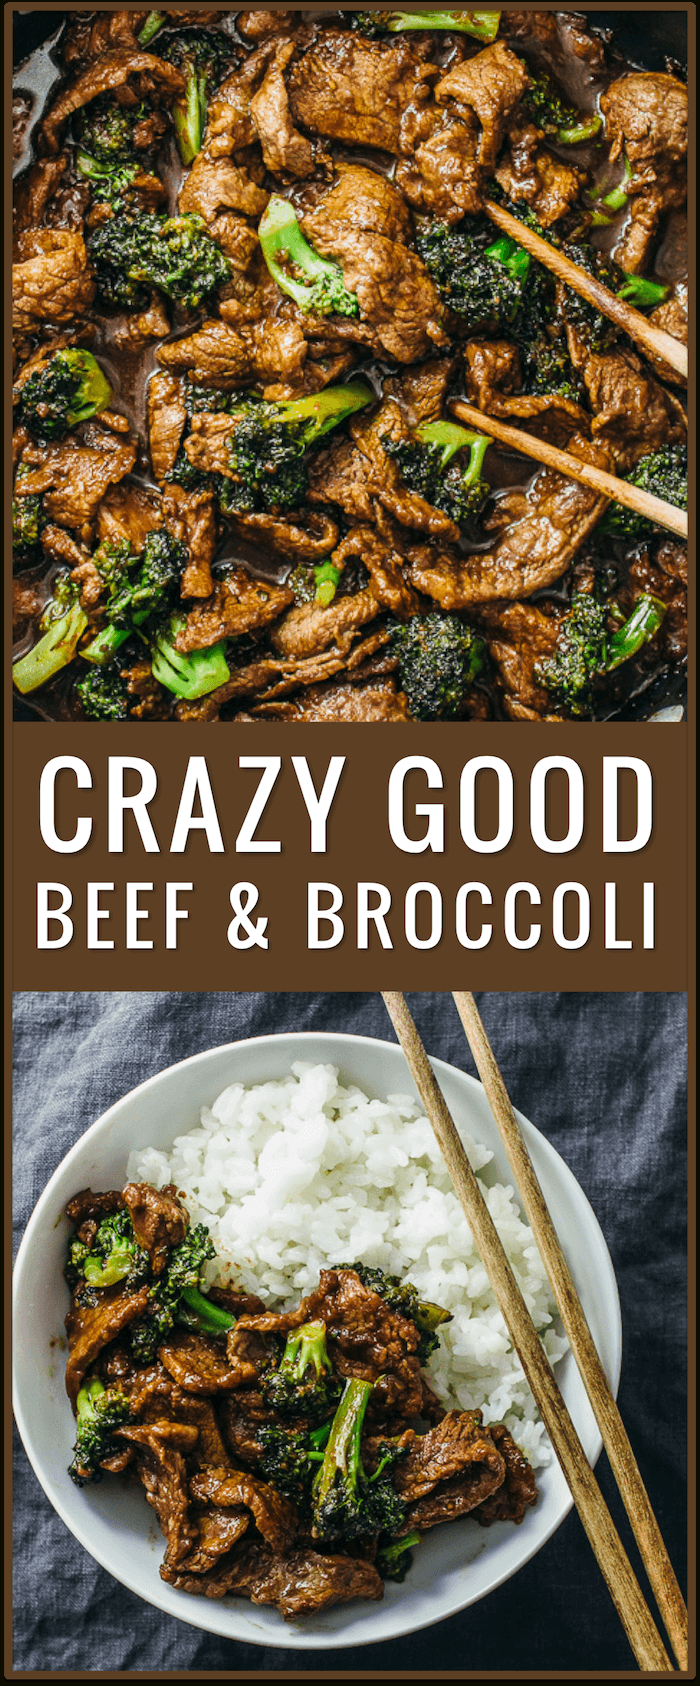 easy beef and broccoli recipe, slow cooker, healthy, authentic Chinese recipe, simple, stir fry, lunch, dinner, steak, rice, crock